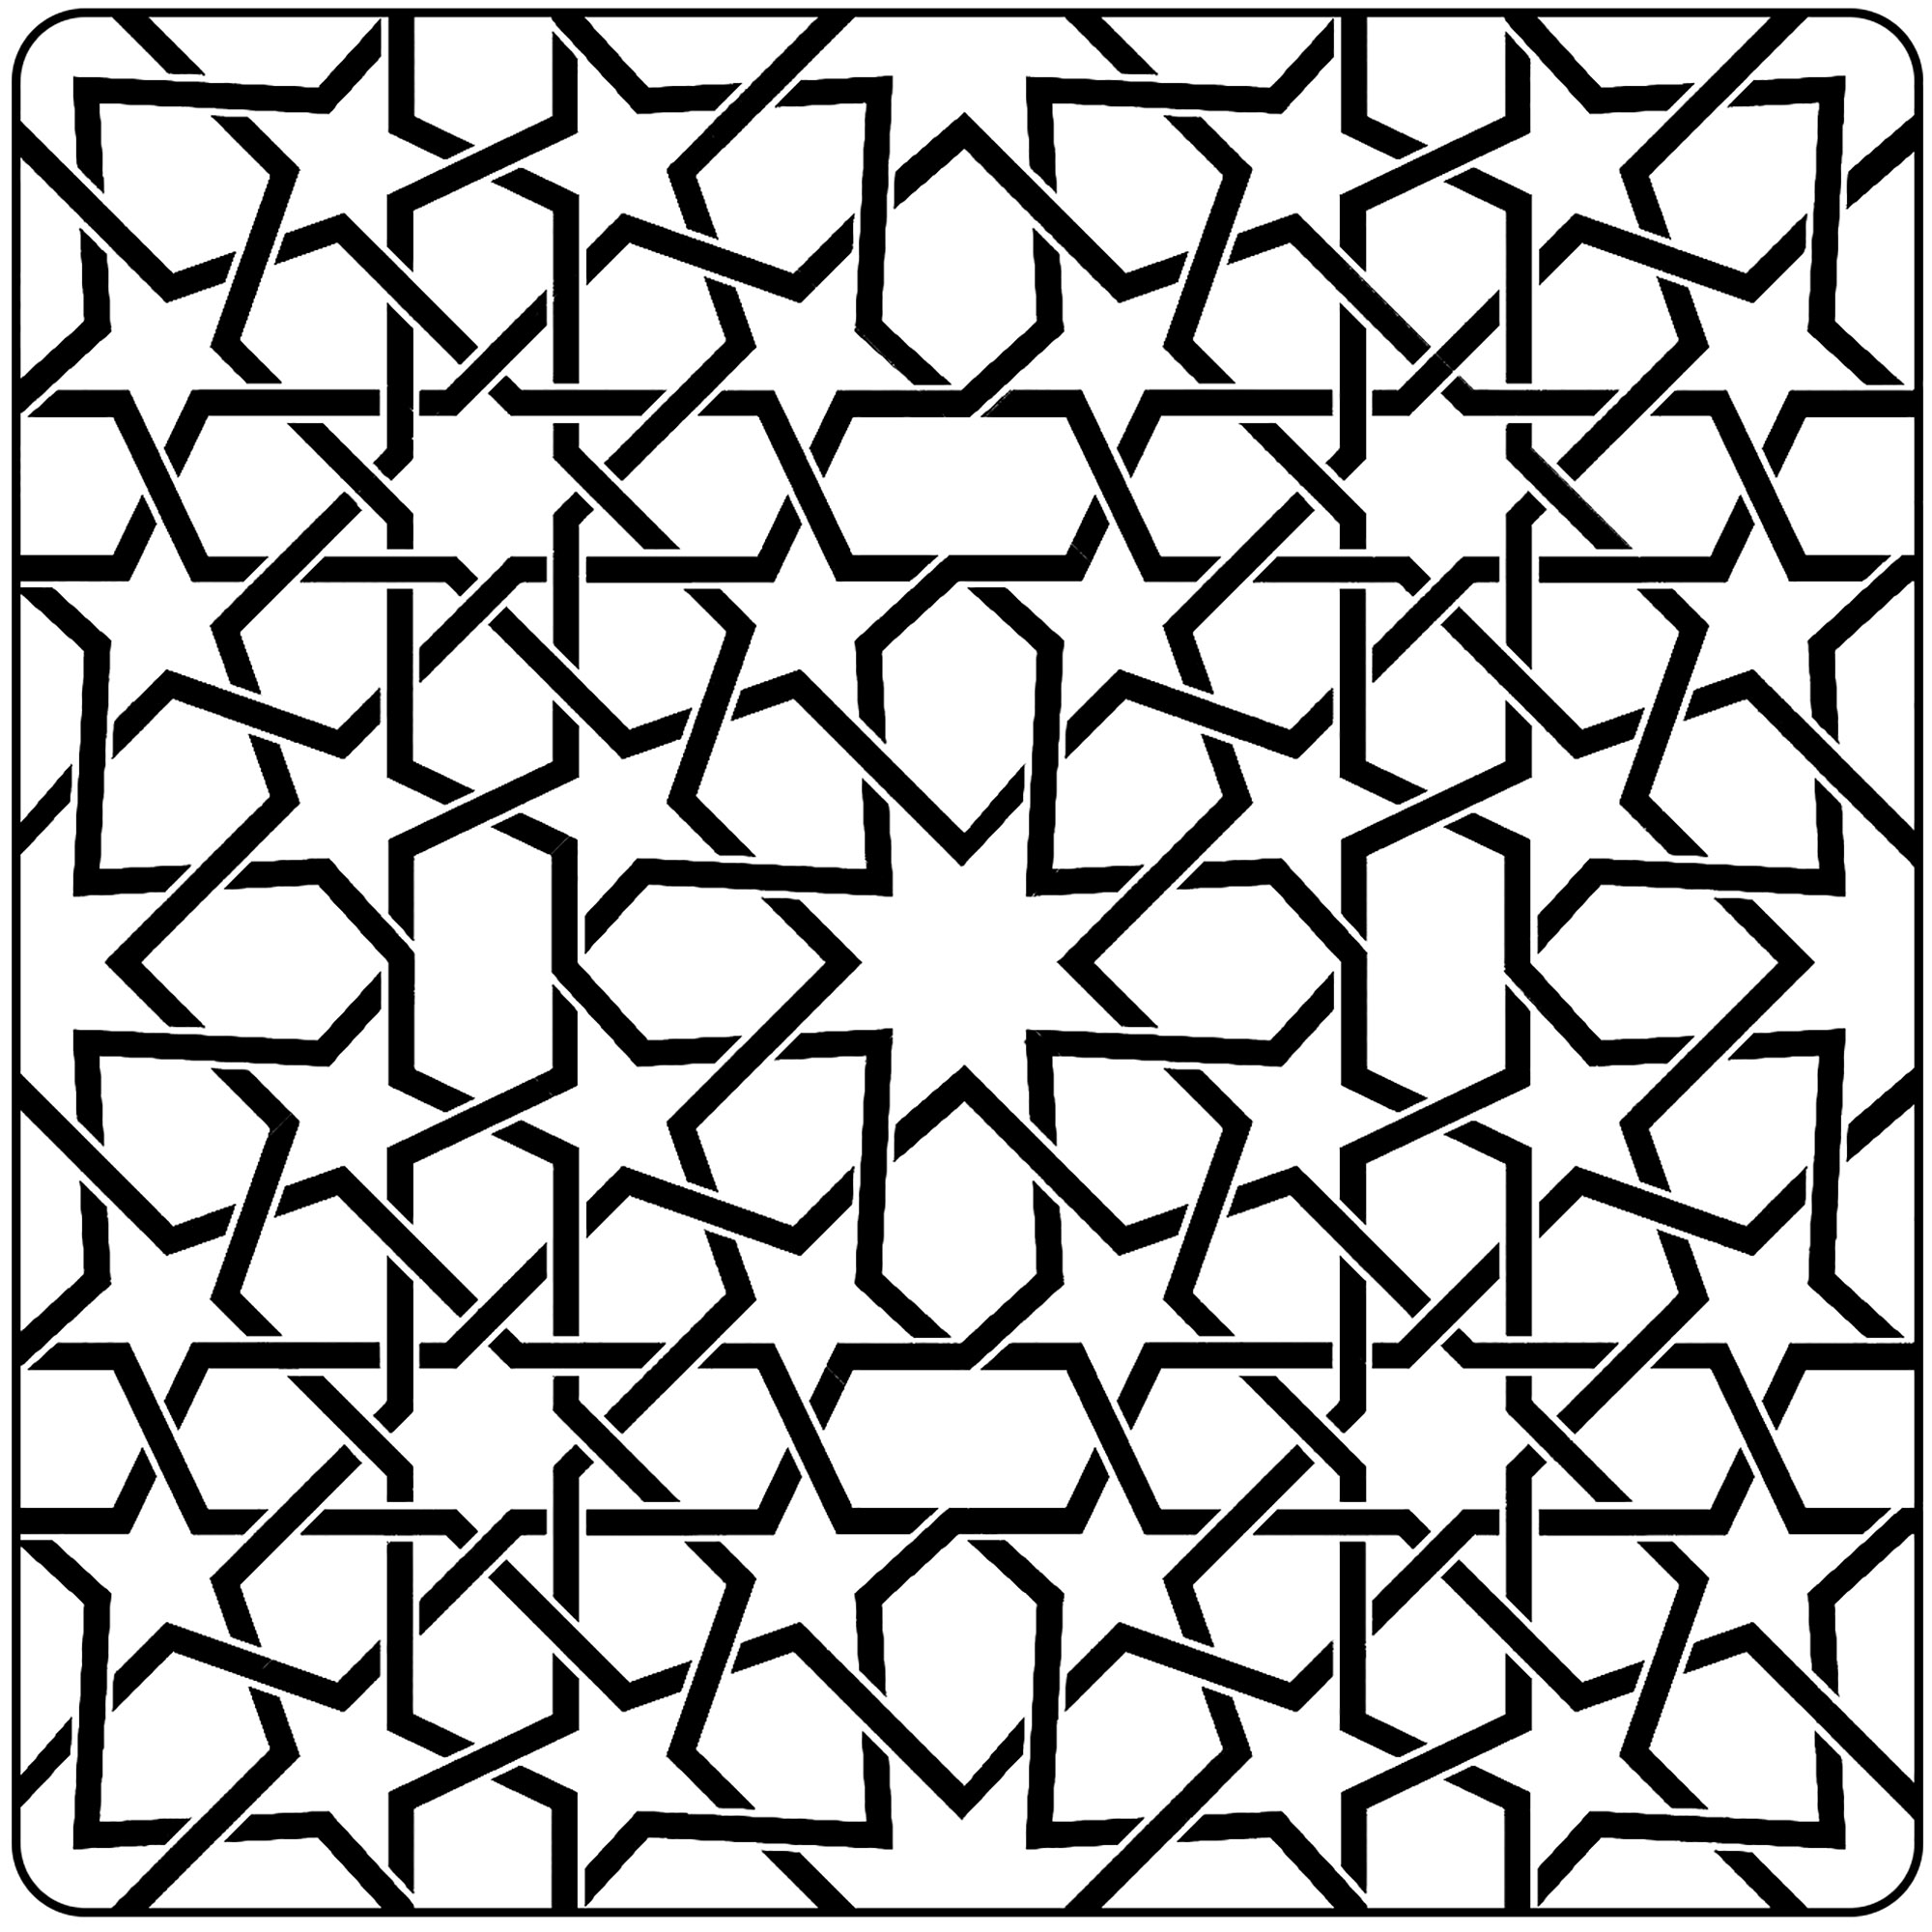 Moorish art - unfinished lines. Pretty motifs inspired by Moorish art. Note that the lines aren't finished, so the shapes aren't full, so coloring this coloring can be tricky!